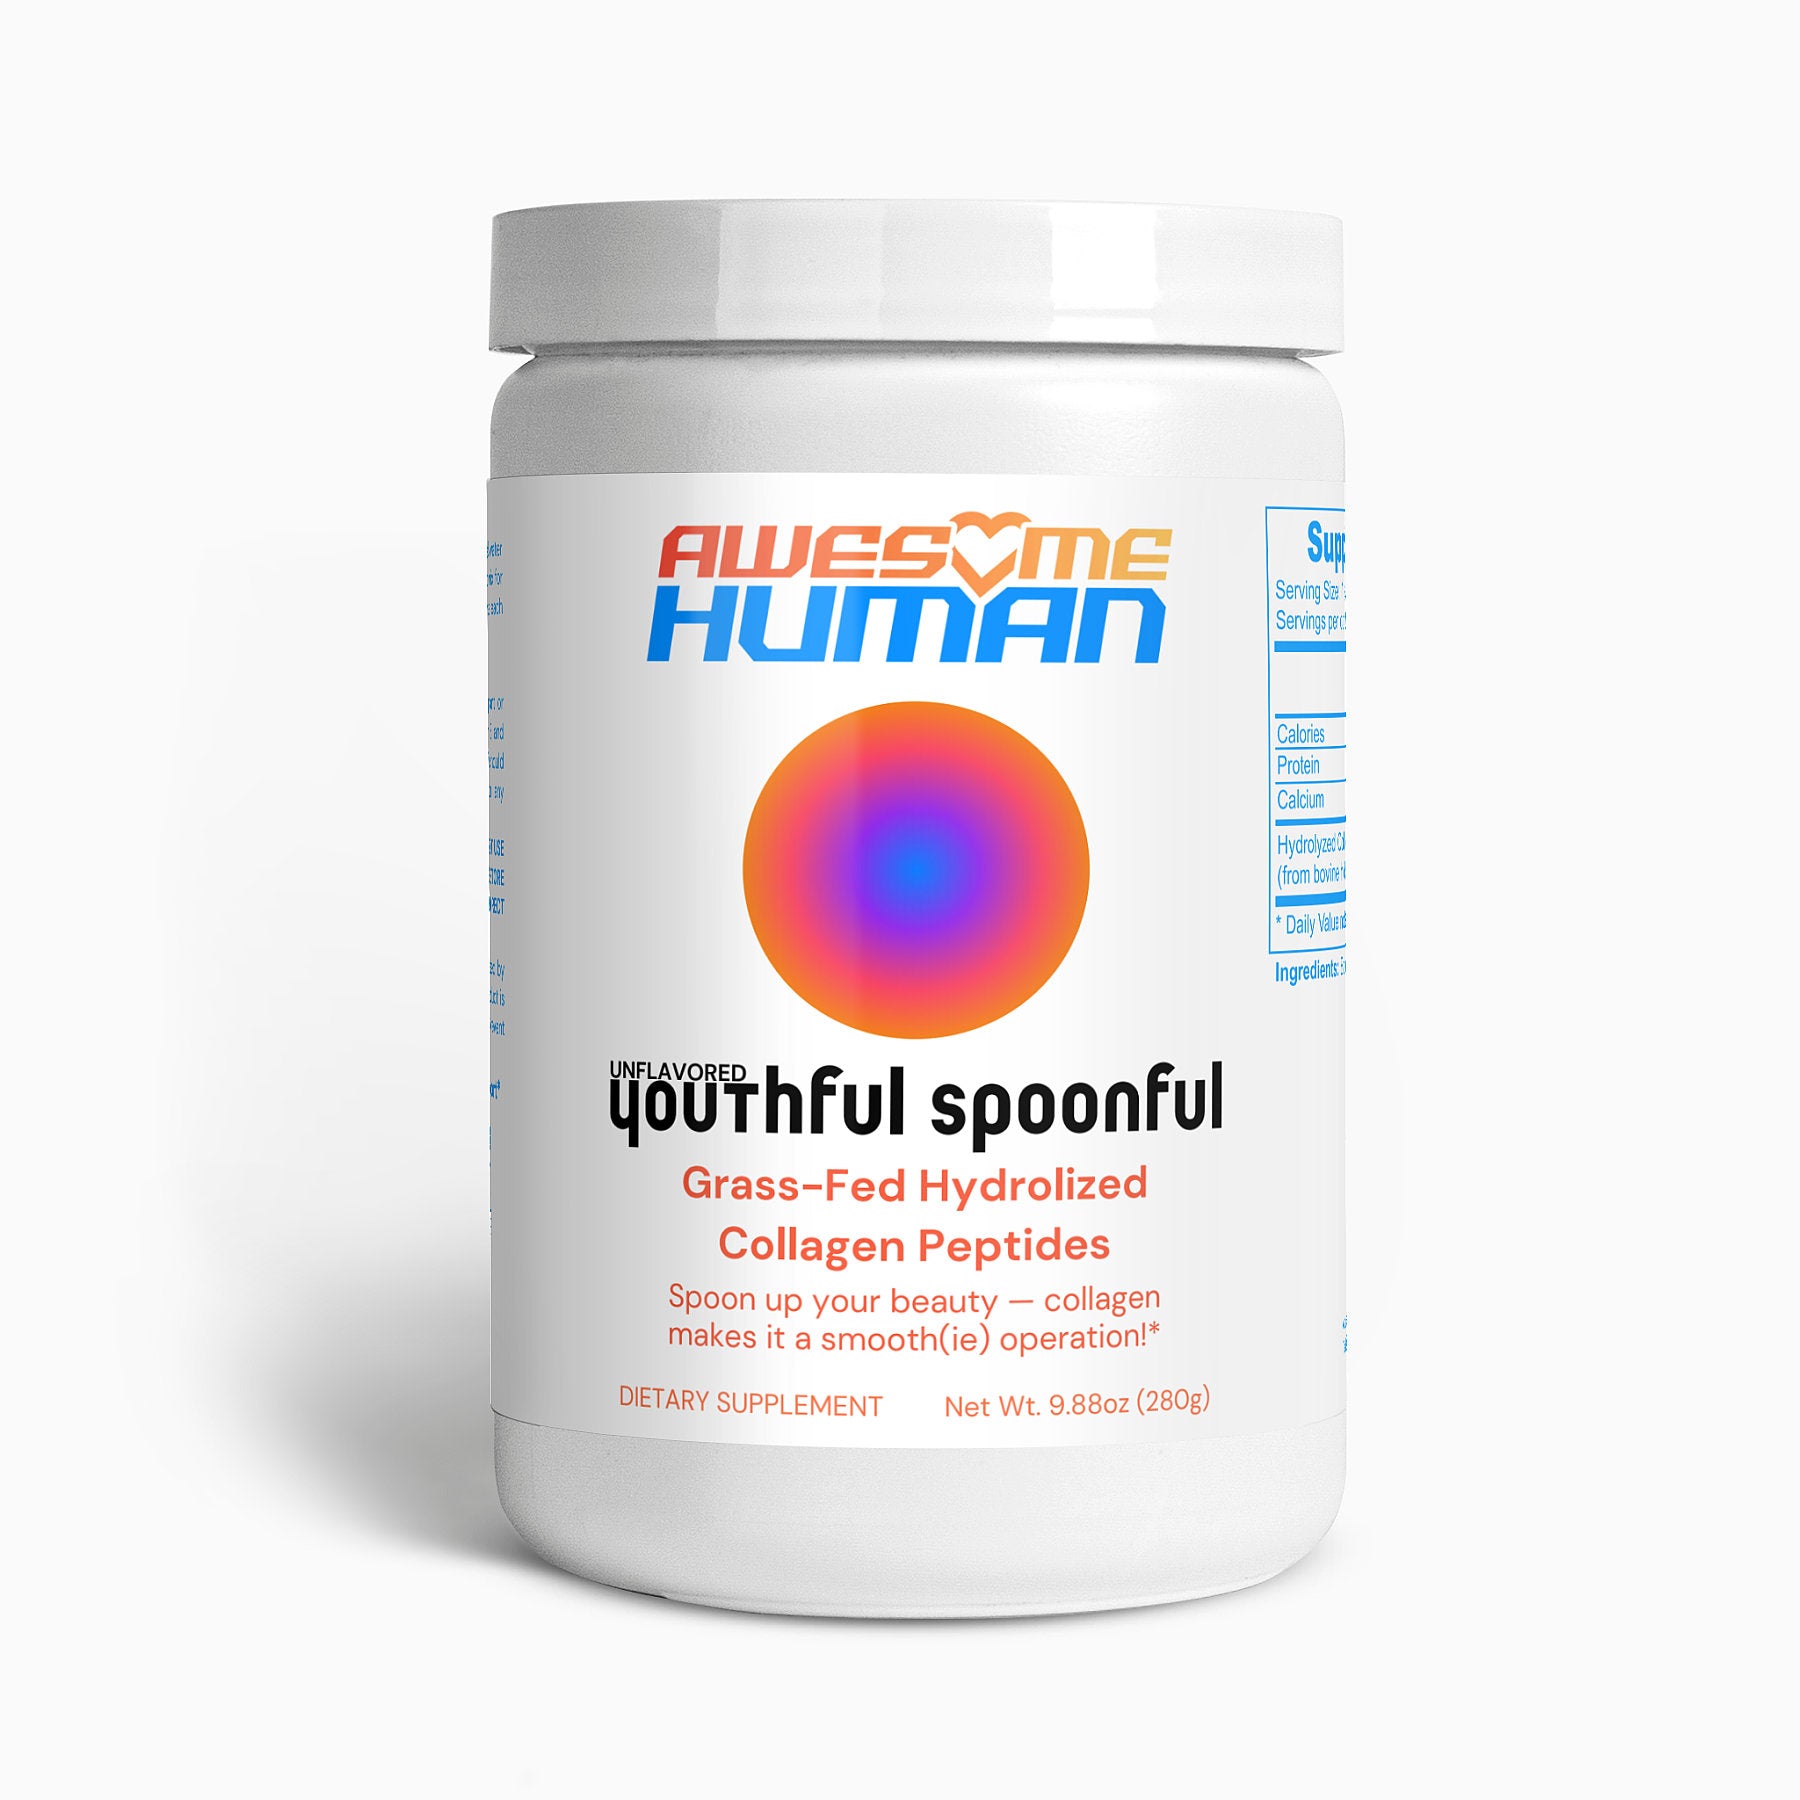 Youthful Spoonfull Unflavored | Hydrolized Collagen Peptides